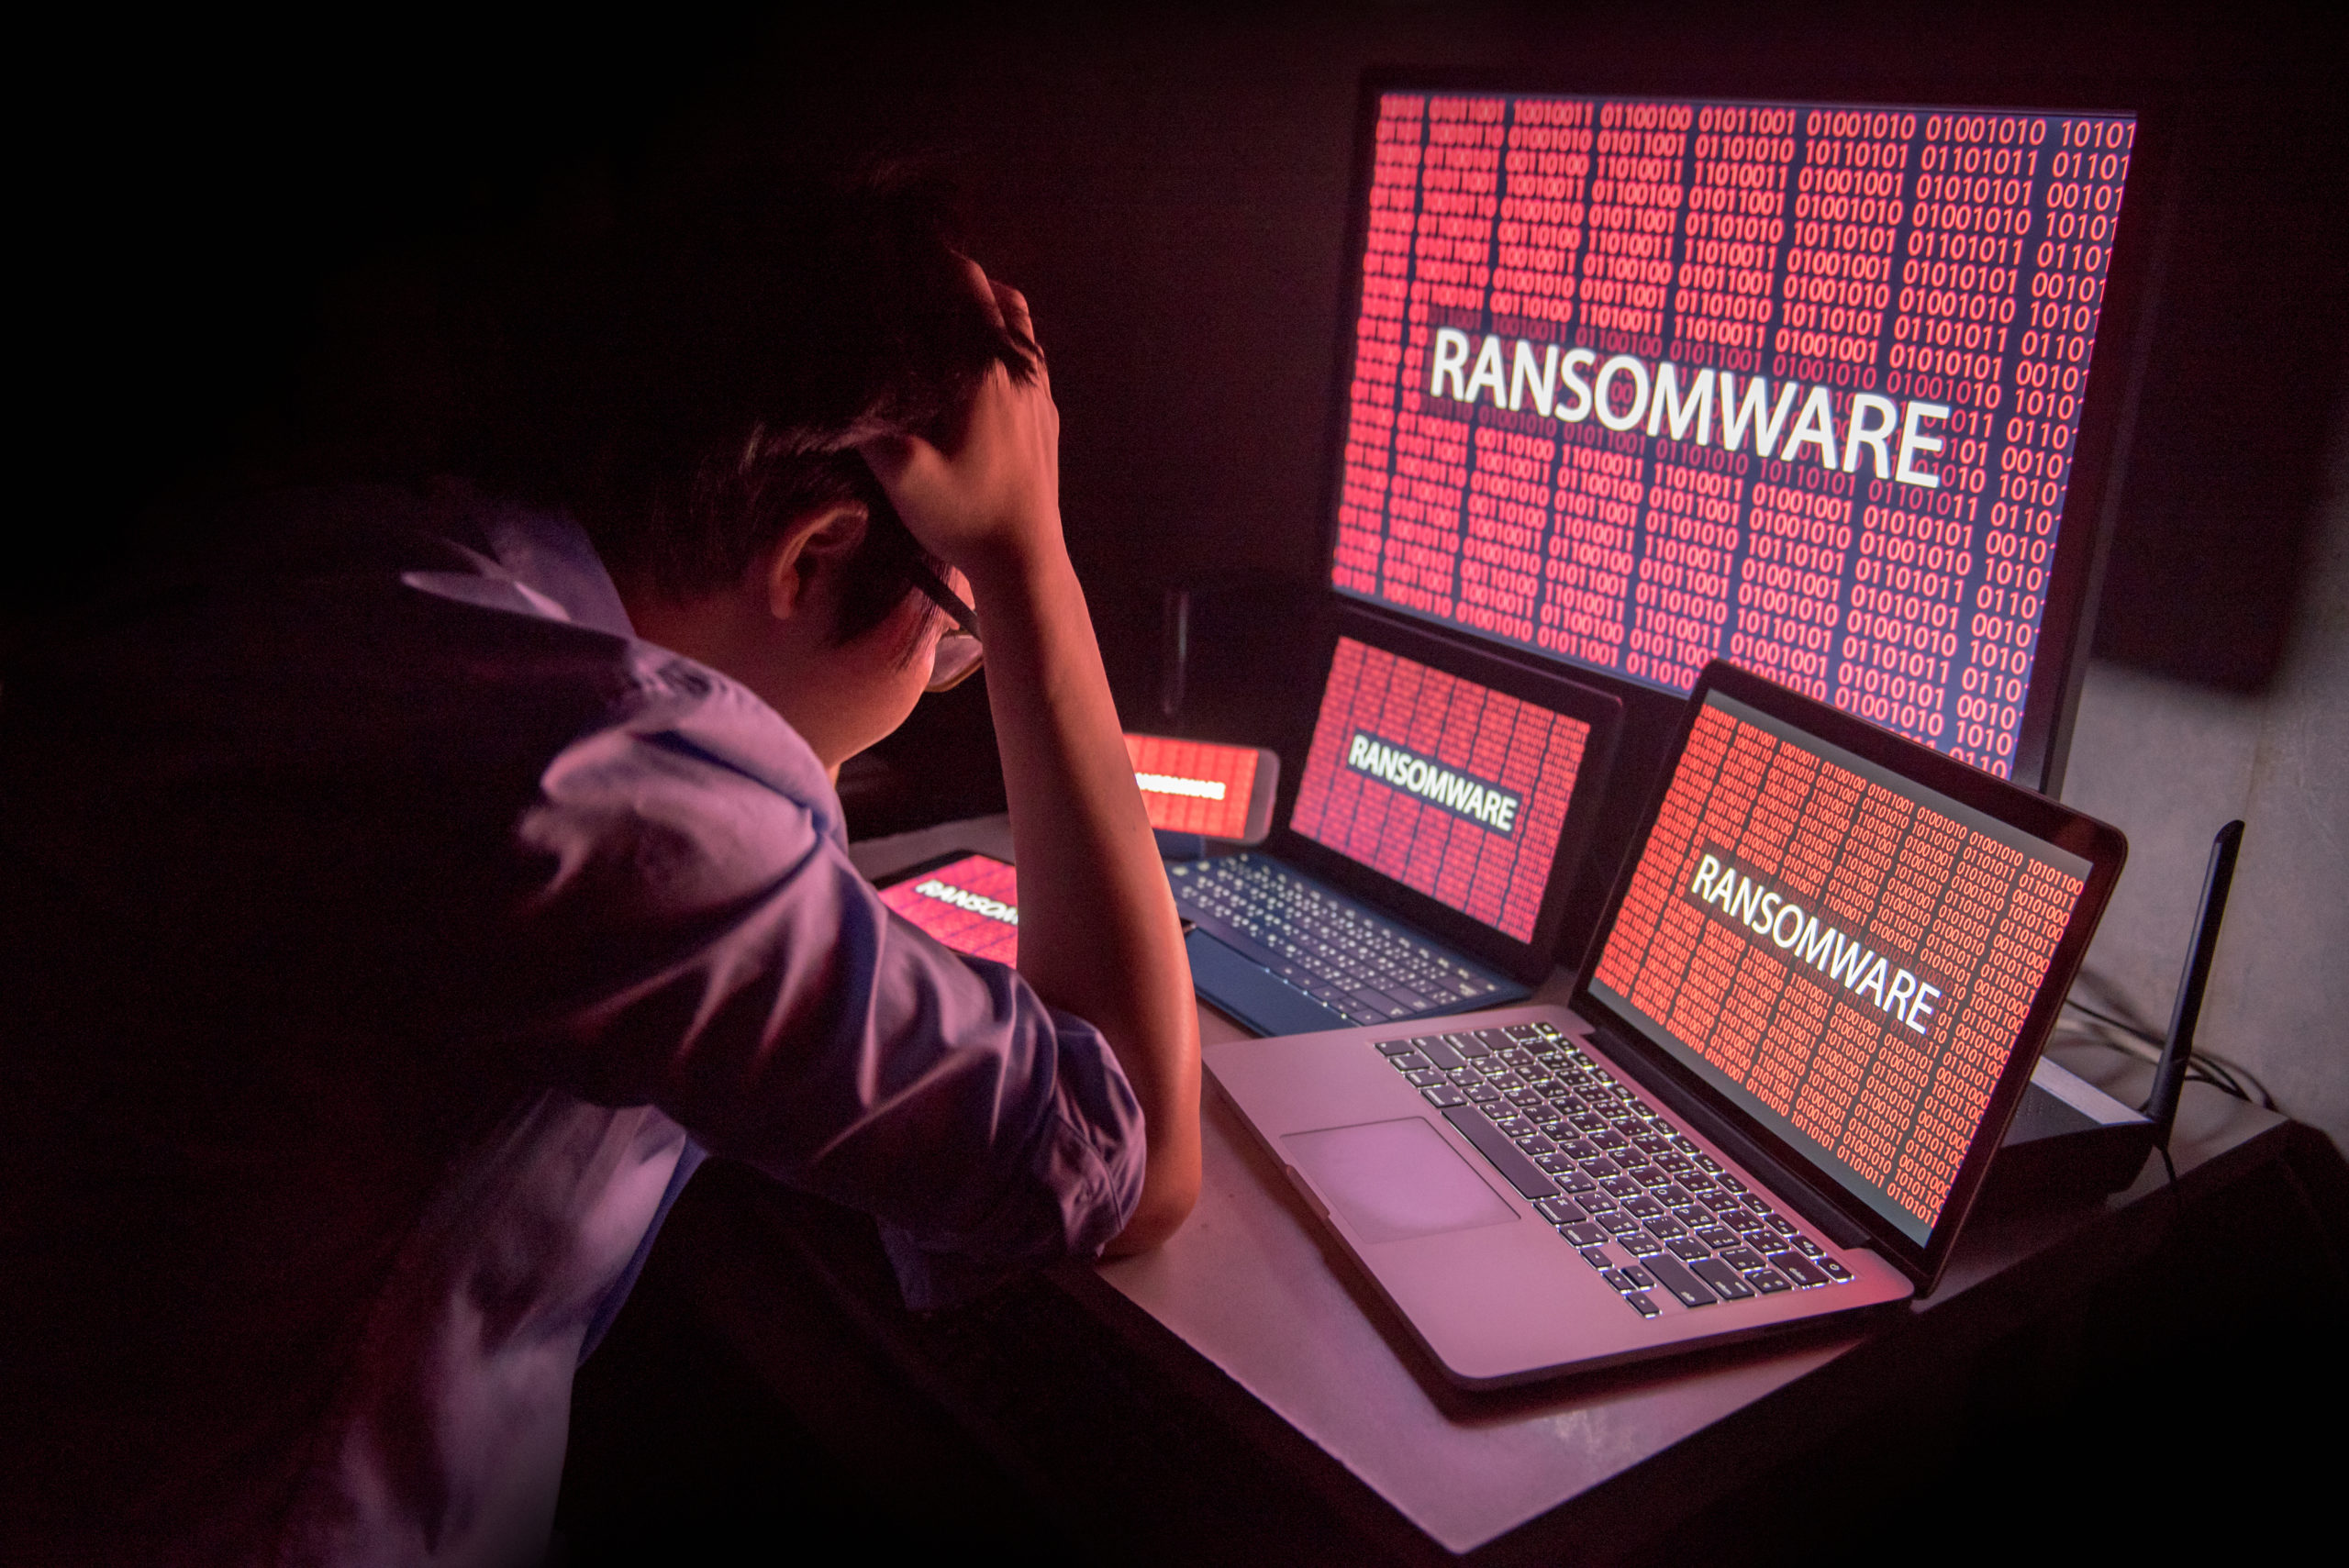 Upset businessman sits in front of several laptop and tablet computers and large monitor, all displaying ransomware lock screens.